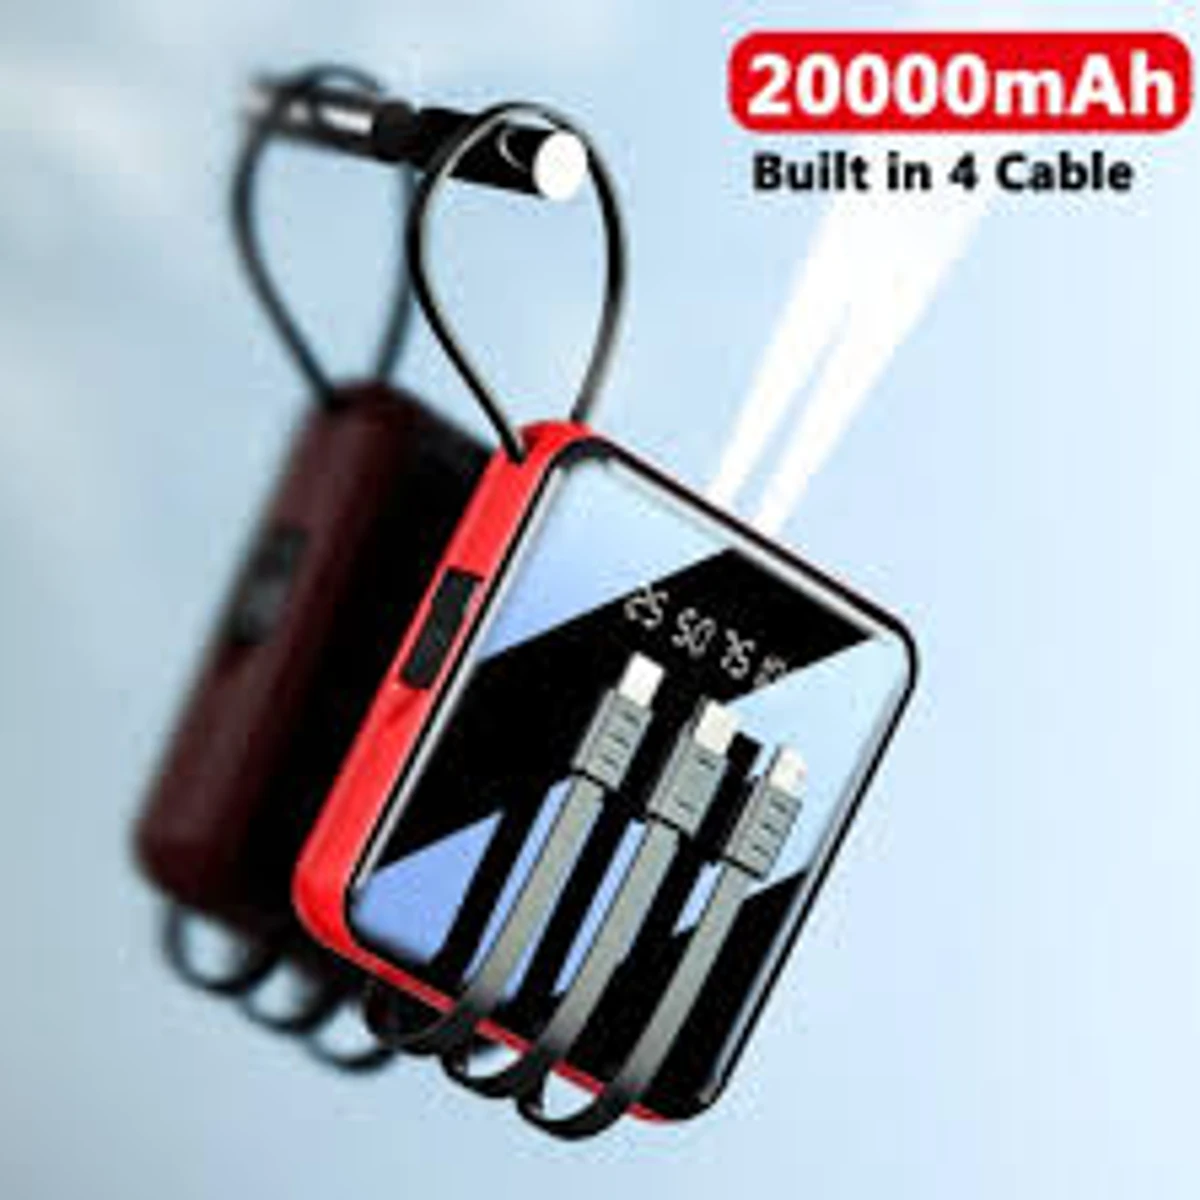 20000 MAH Powerbank with LED Display and All in One Cable set